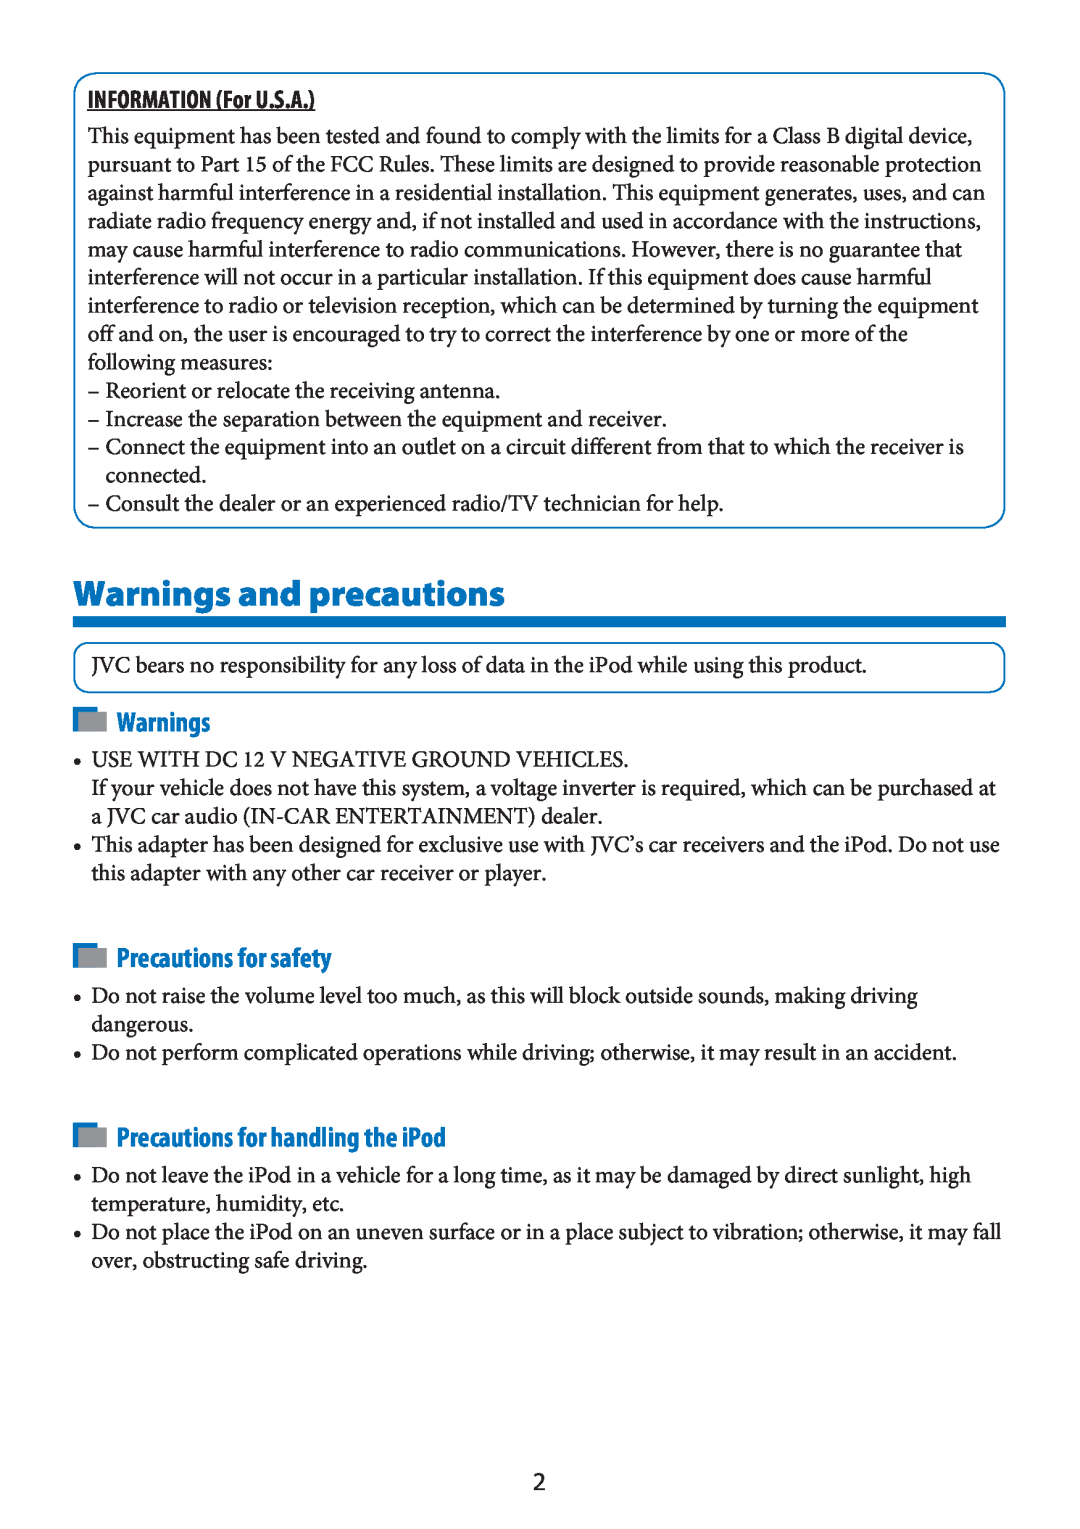 JVC KS-PD100 Warnings and precautions, Precautions for safety, Precautions for handling the iPod, INFORMATION For U.S.A 